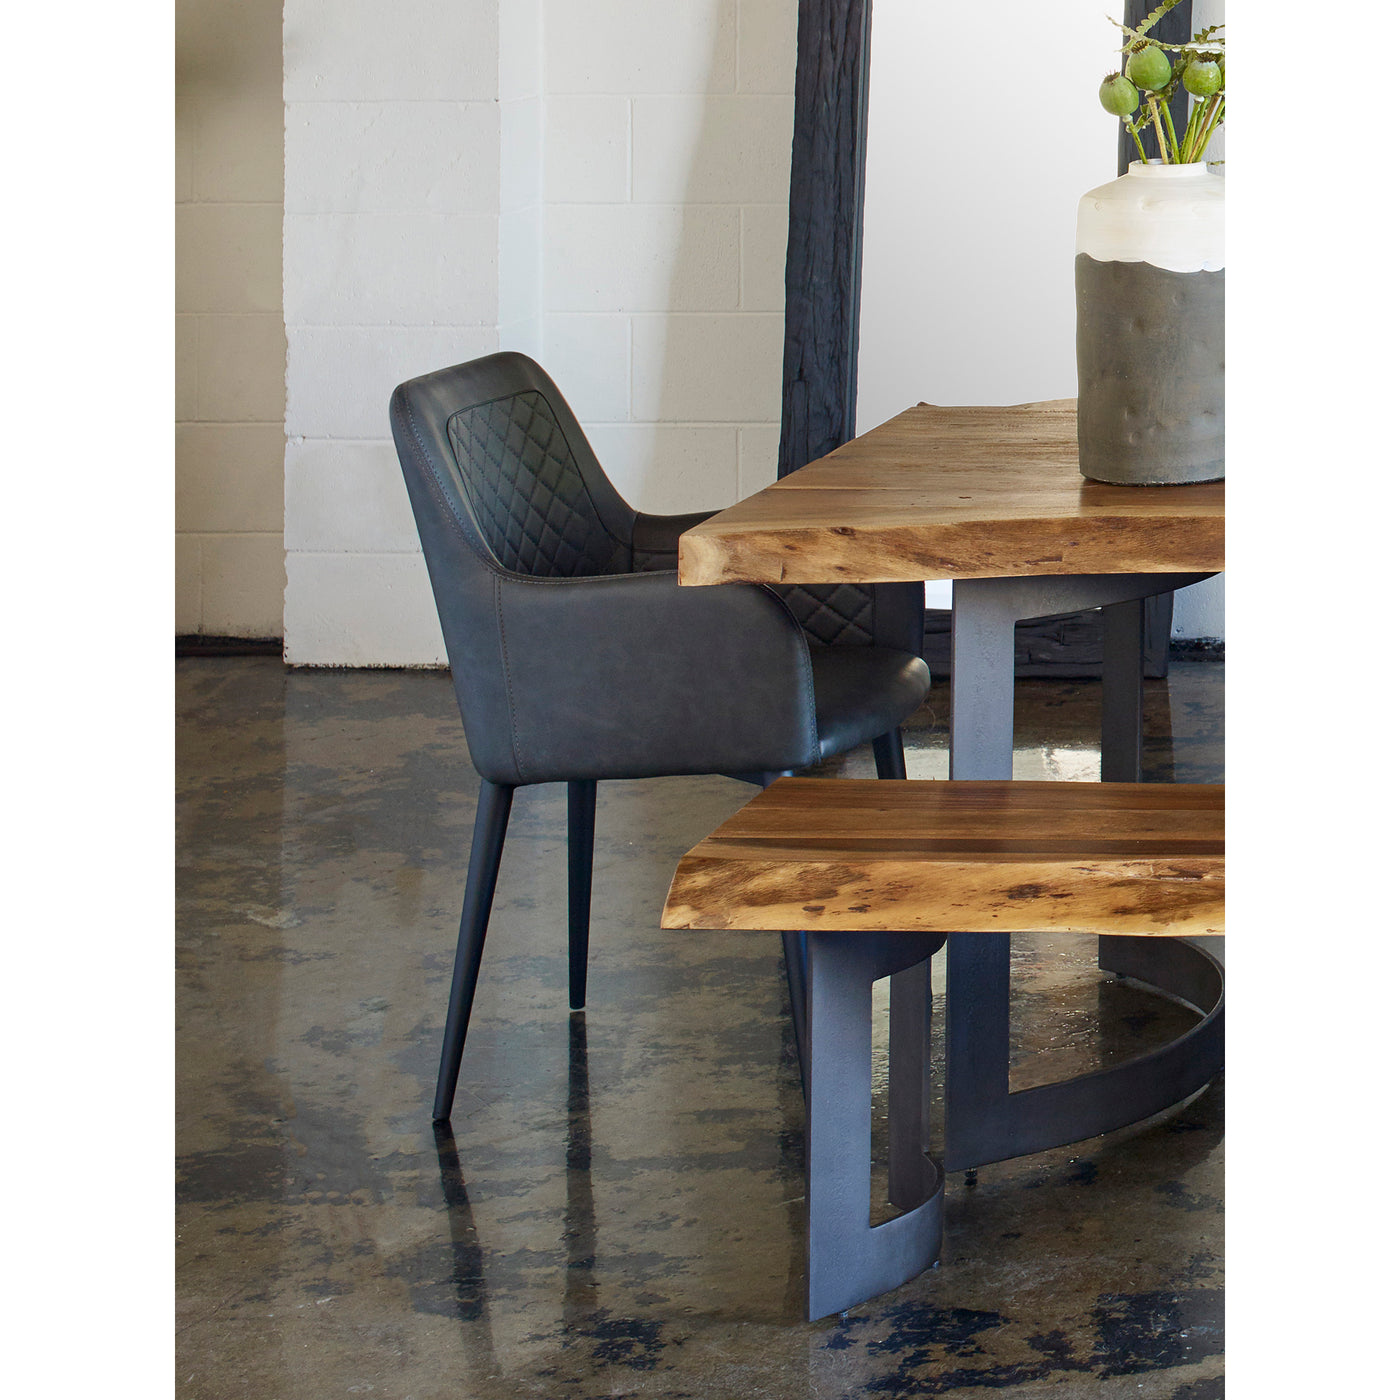 A refined and contemporary dining chair the Cantata is made with sturdy steel legs and a durable and easy-care polyurethan...